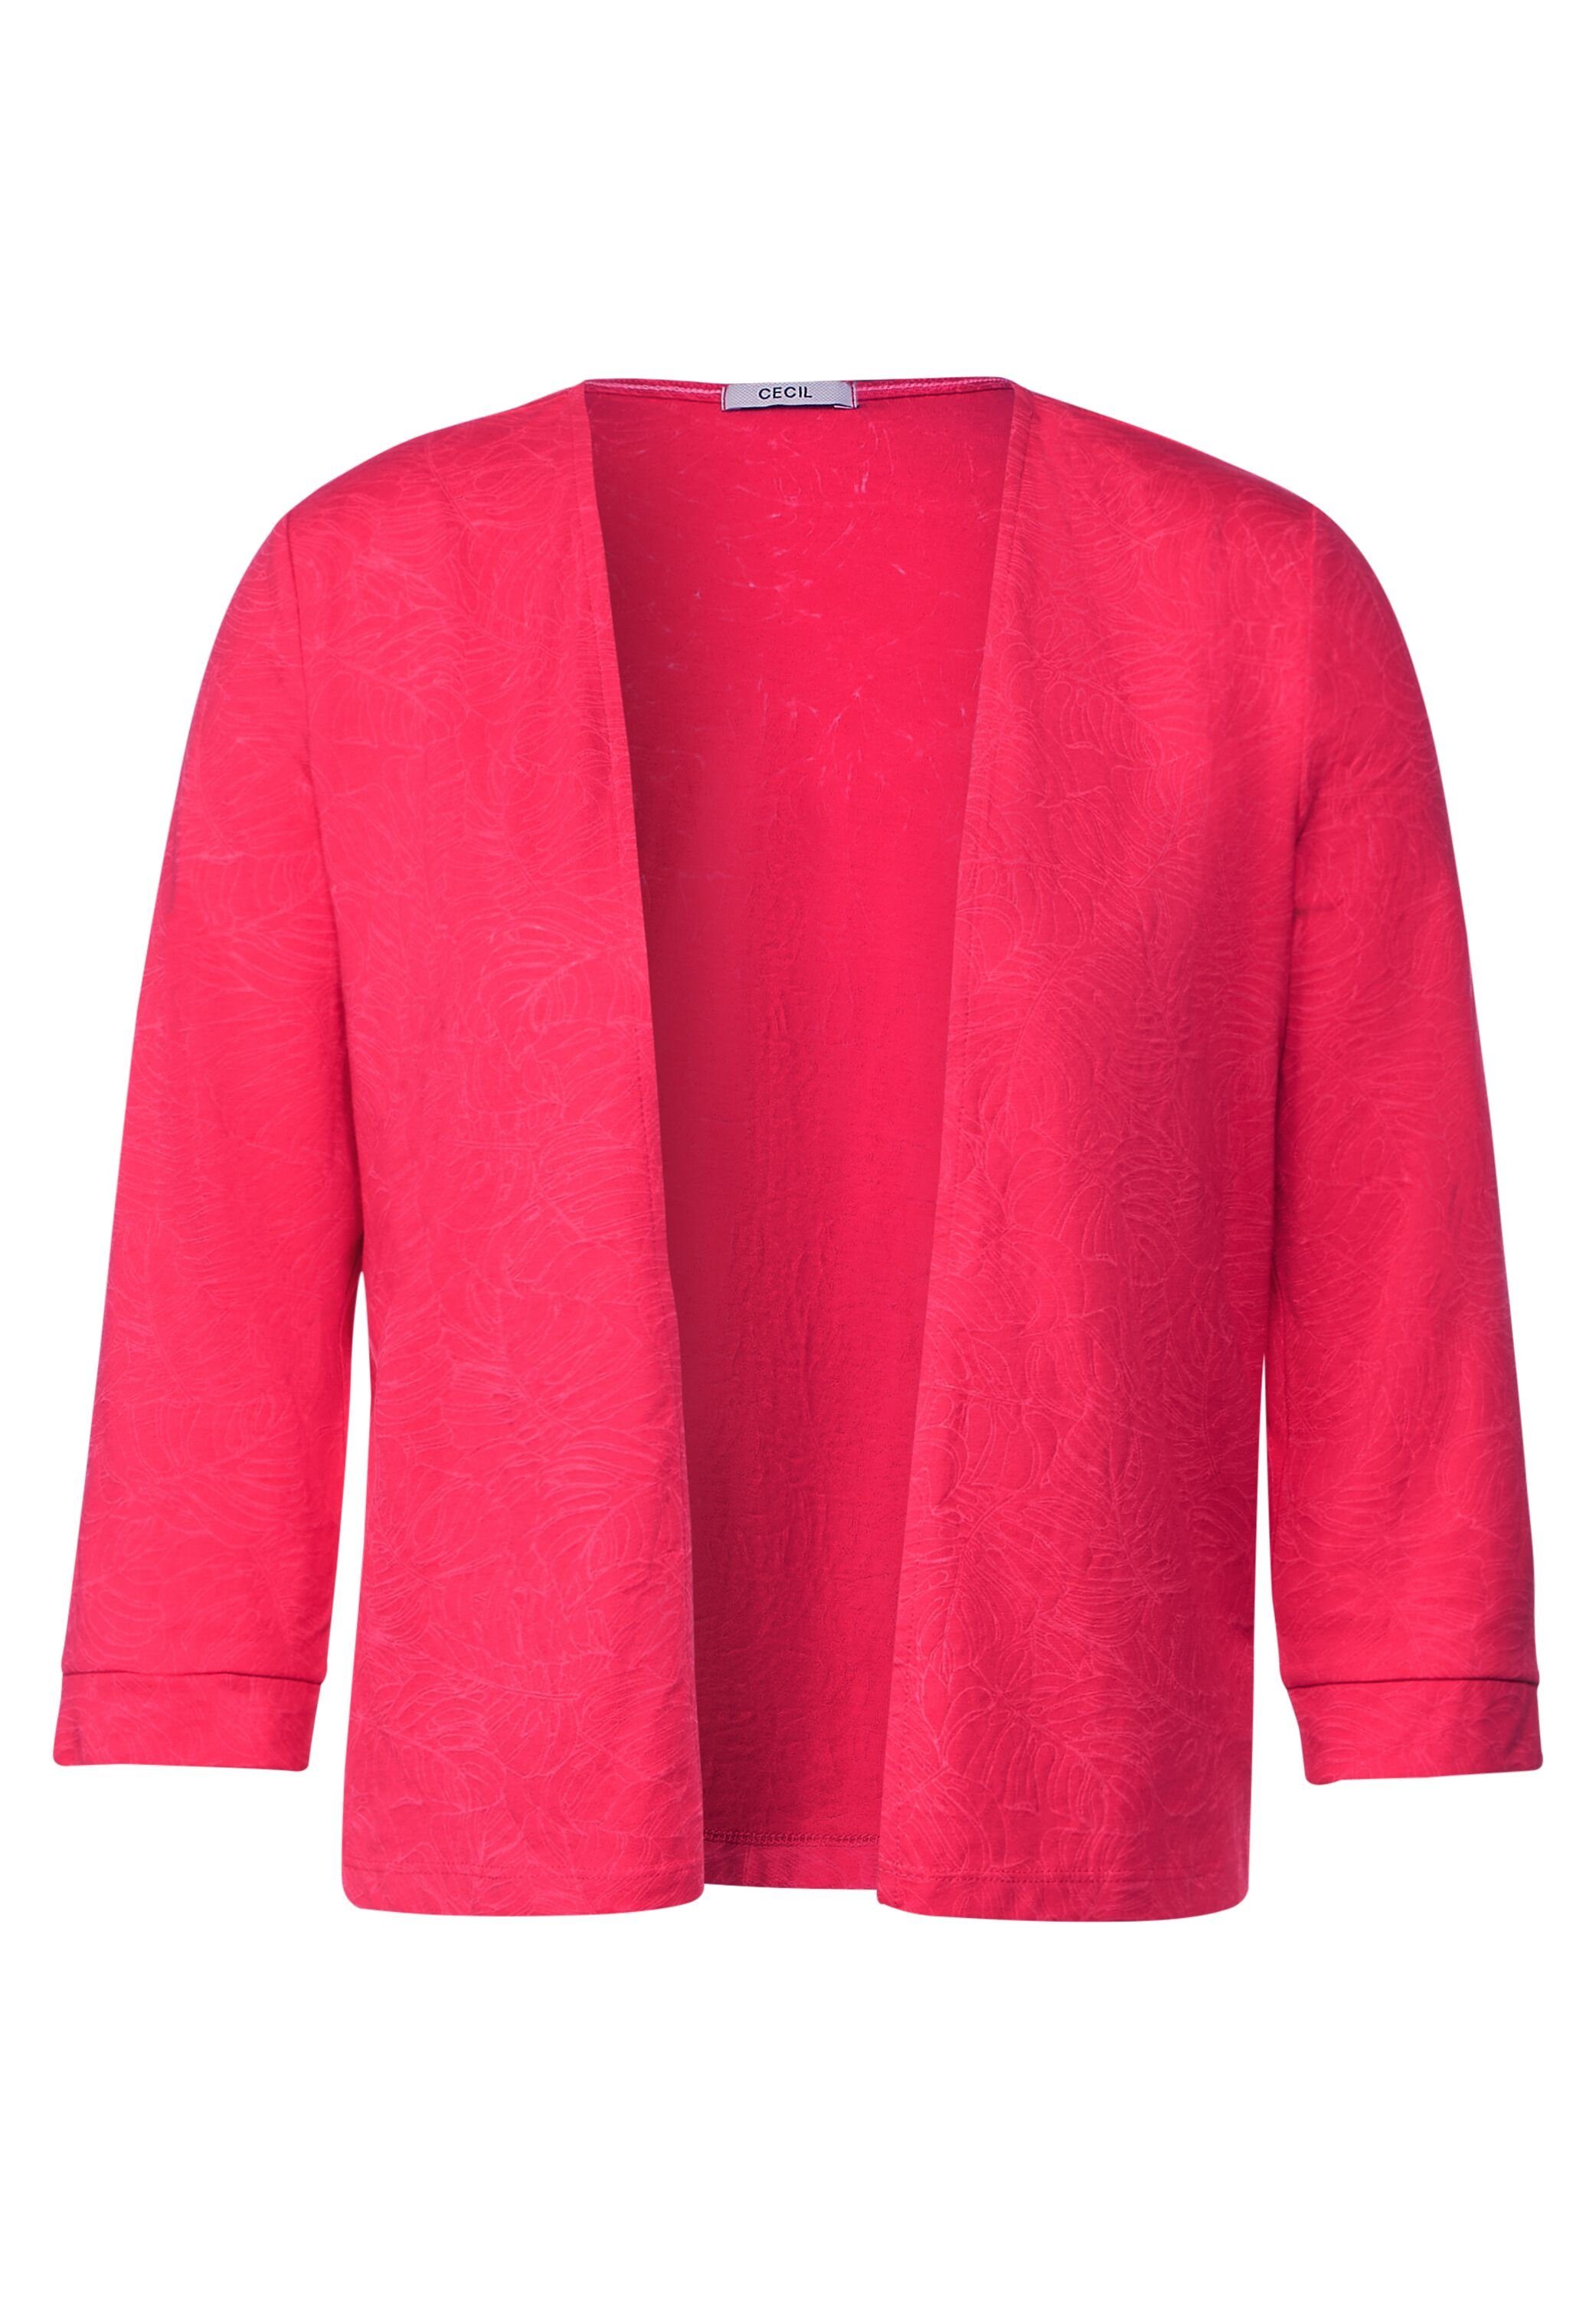 Shirtjacke strawberry red aus out Cecil burn Feinstrick